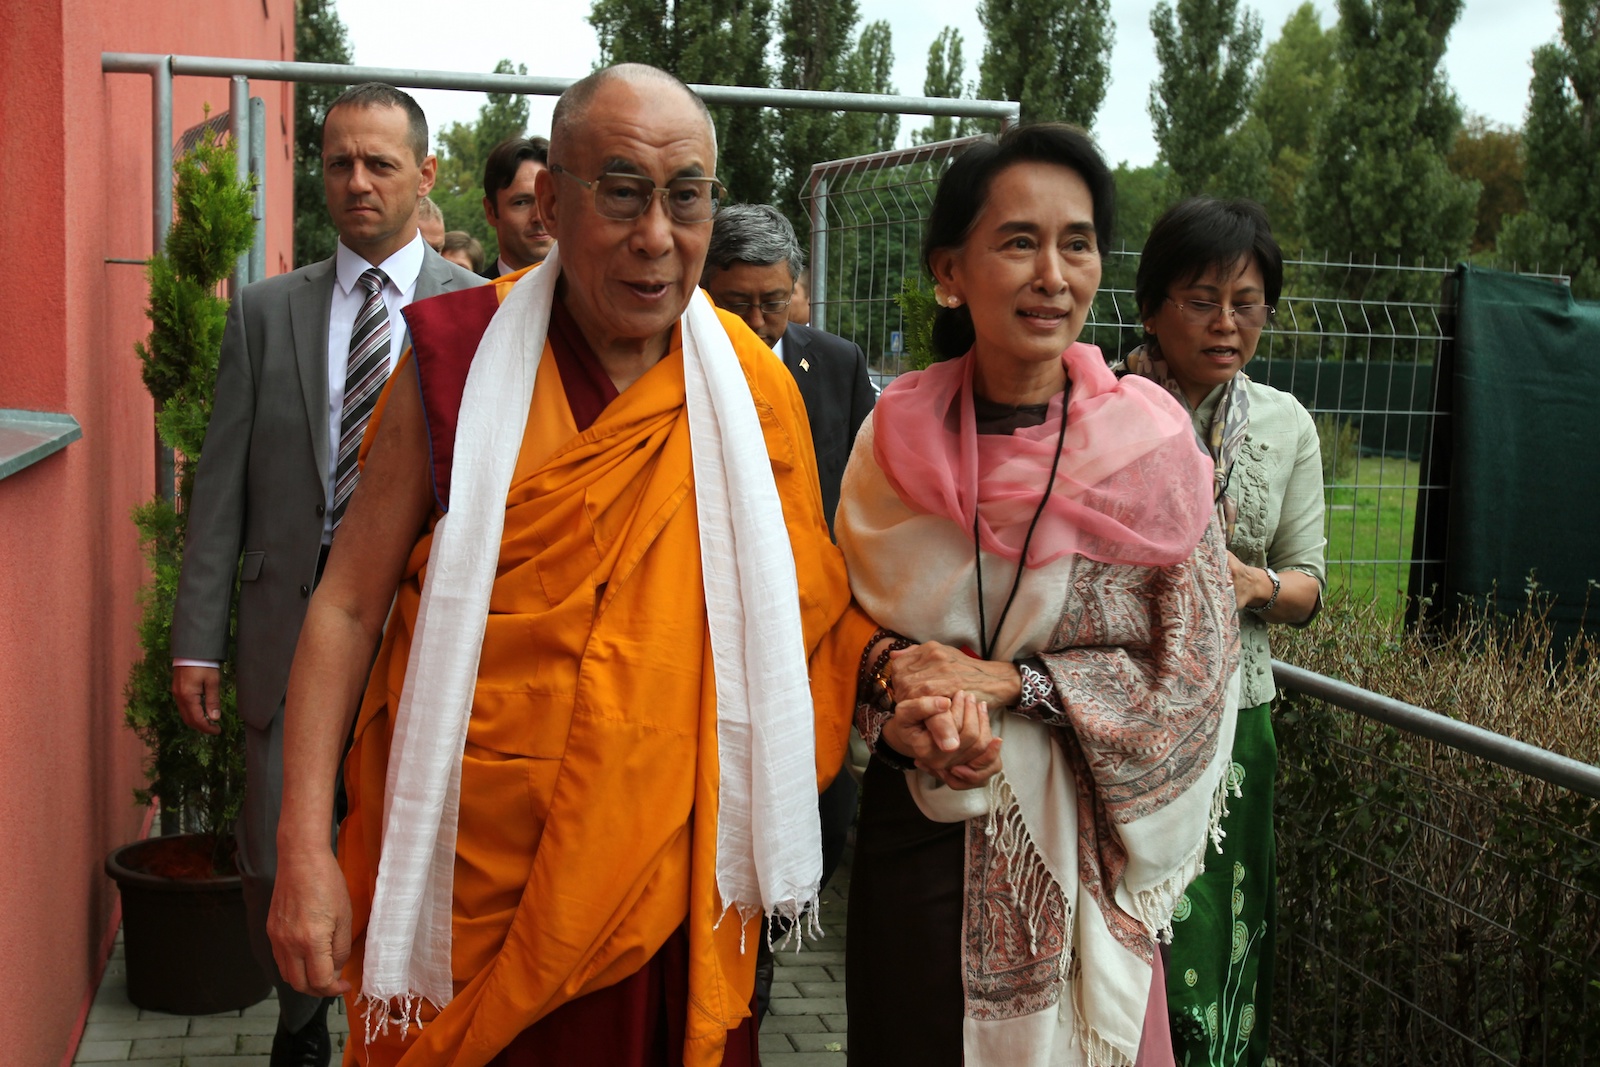 The Dalai Lama and then Myanmar opposition leader Aung San Suu Kyi prior to a private meeting on 15 September 2013, in Prague, Czech Republic.